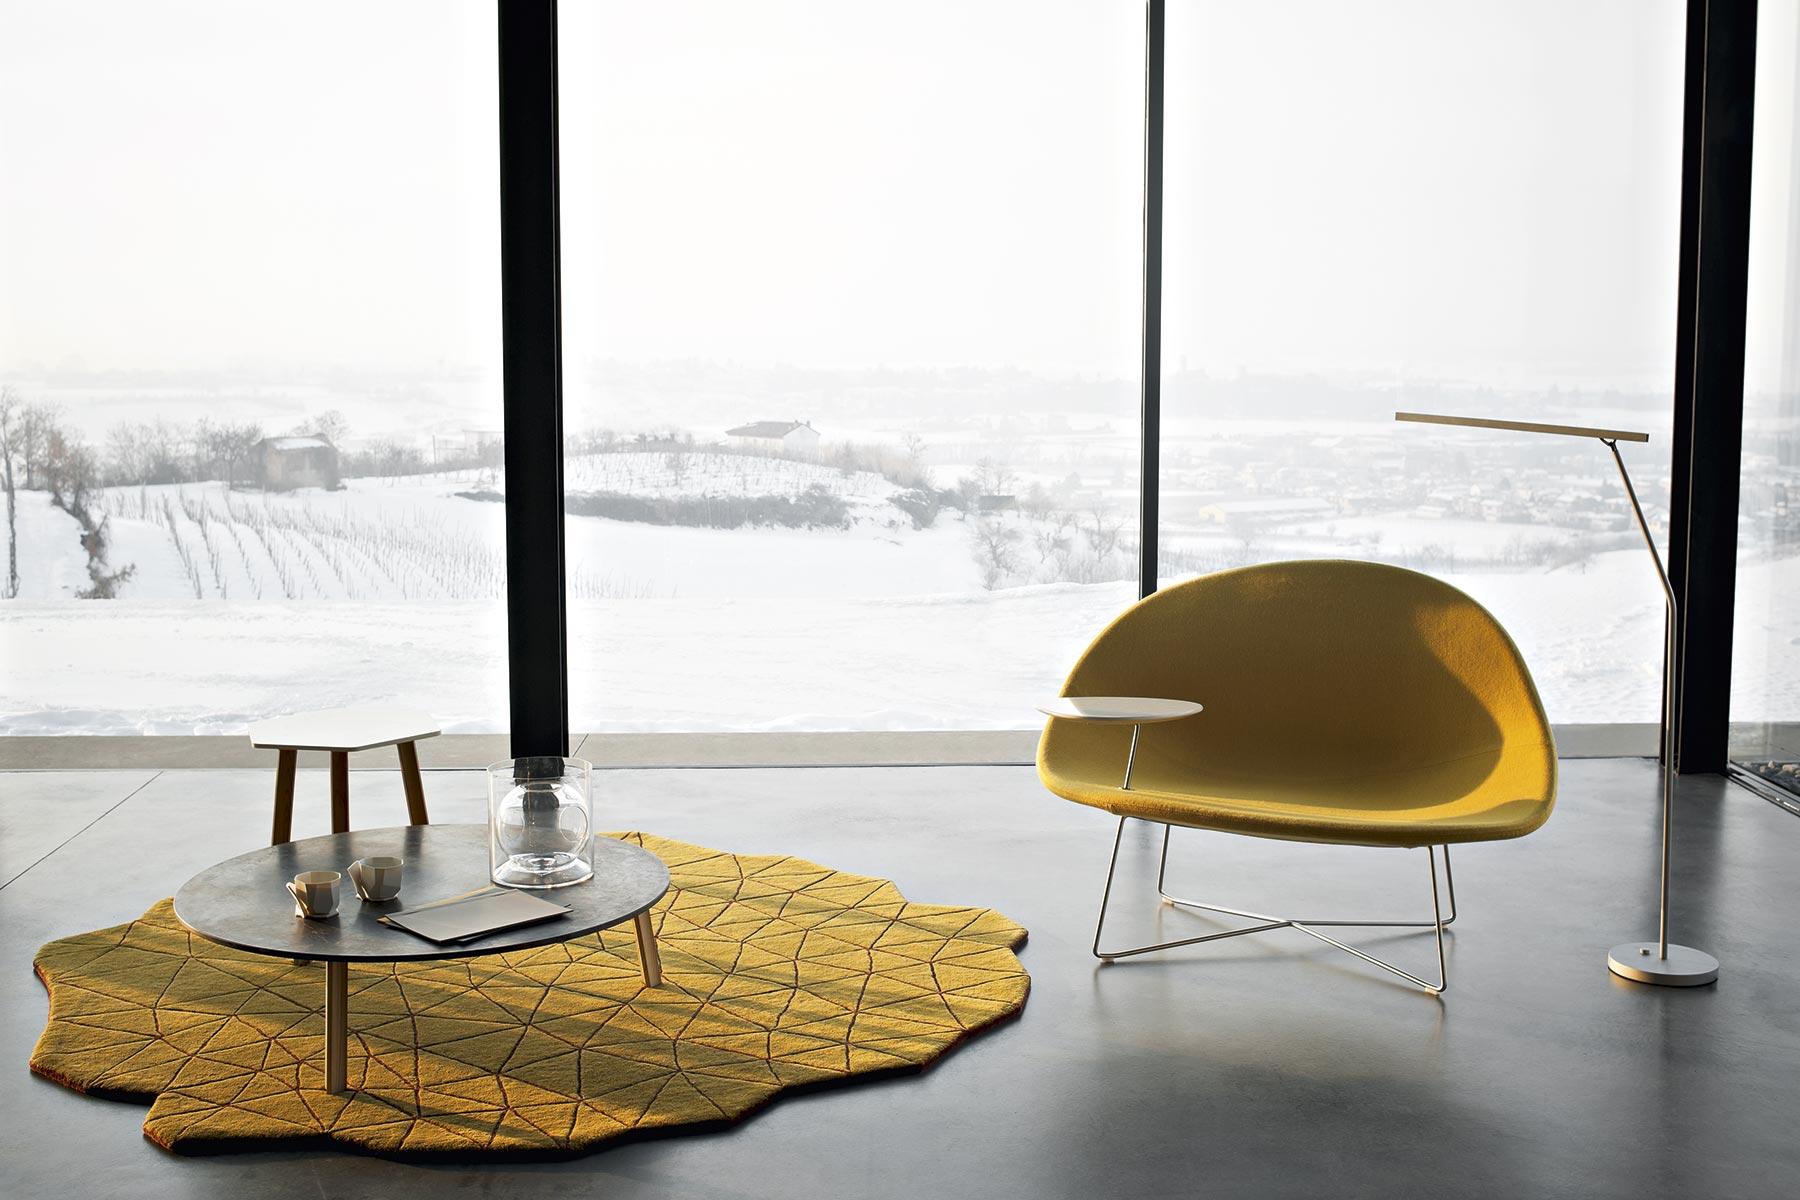 In waiting spaces, people naturally tend to assume a relaxed posture, particularly while using their computer, laptop or smartphone for work or to pass the time. This consideration was the starting point for the conception of Isola, an armchair with